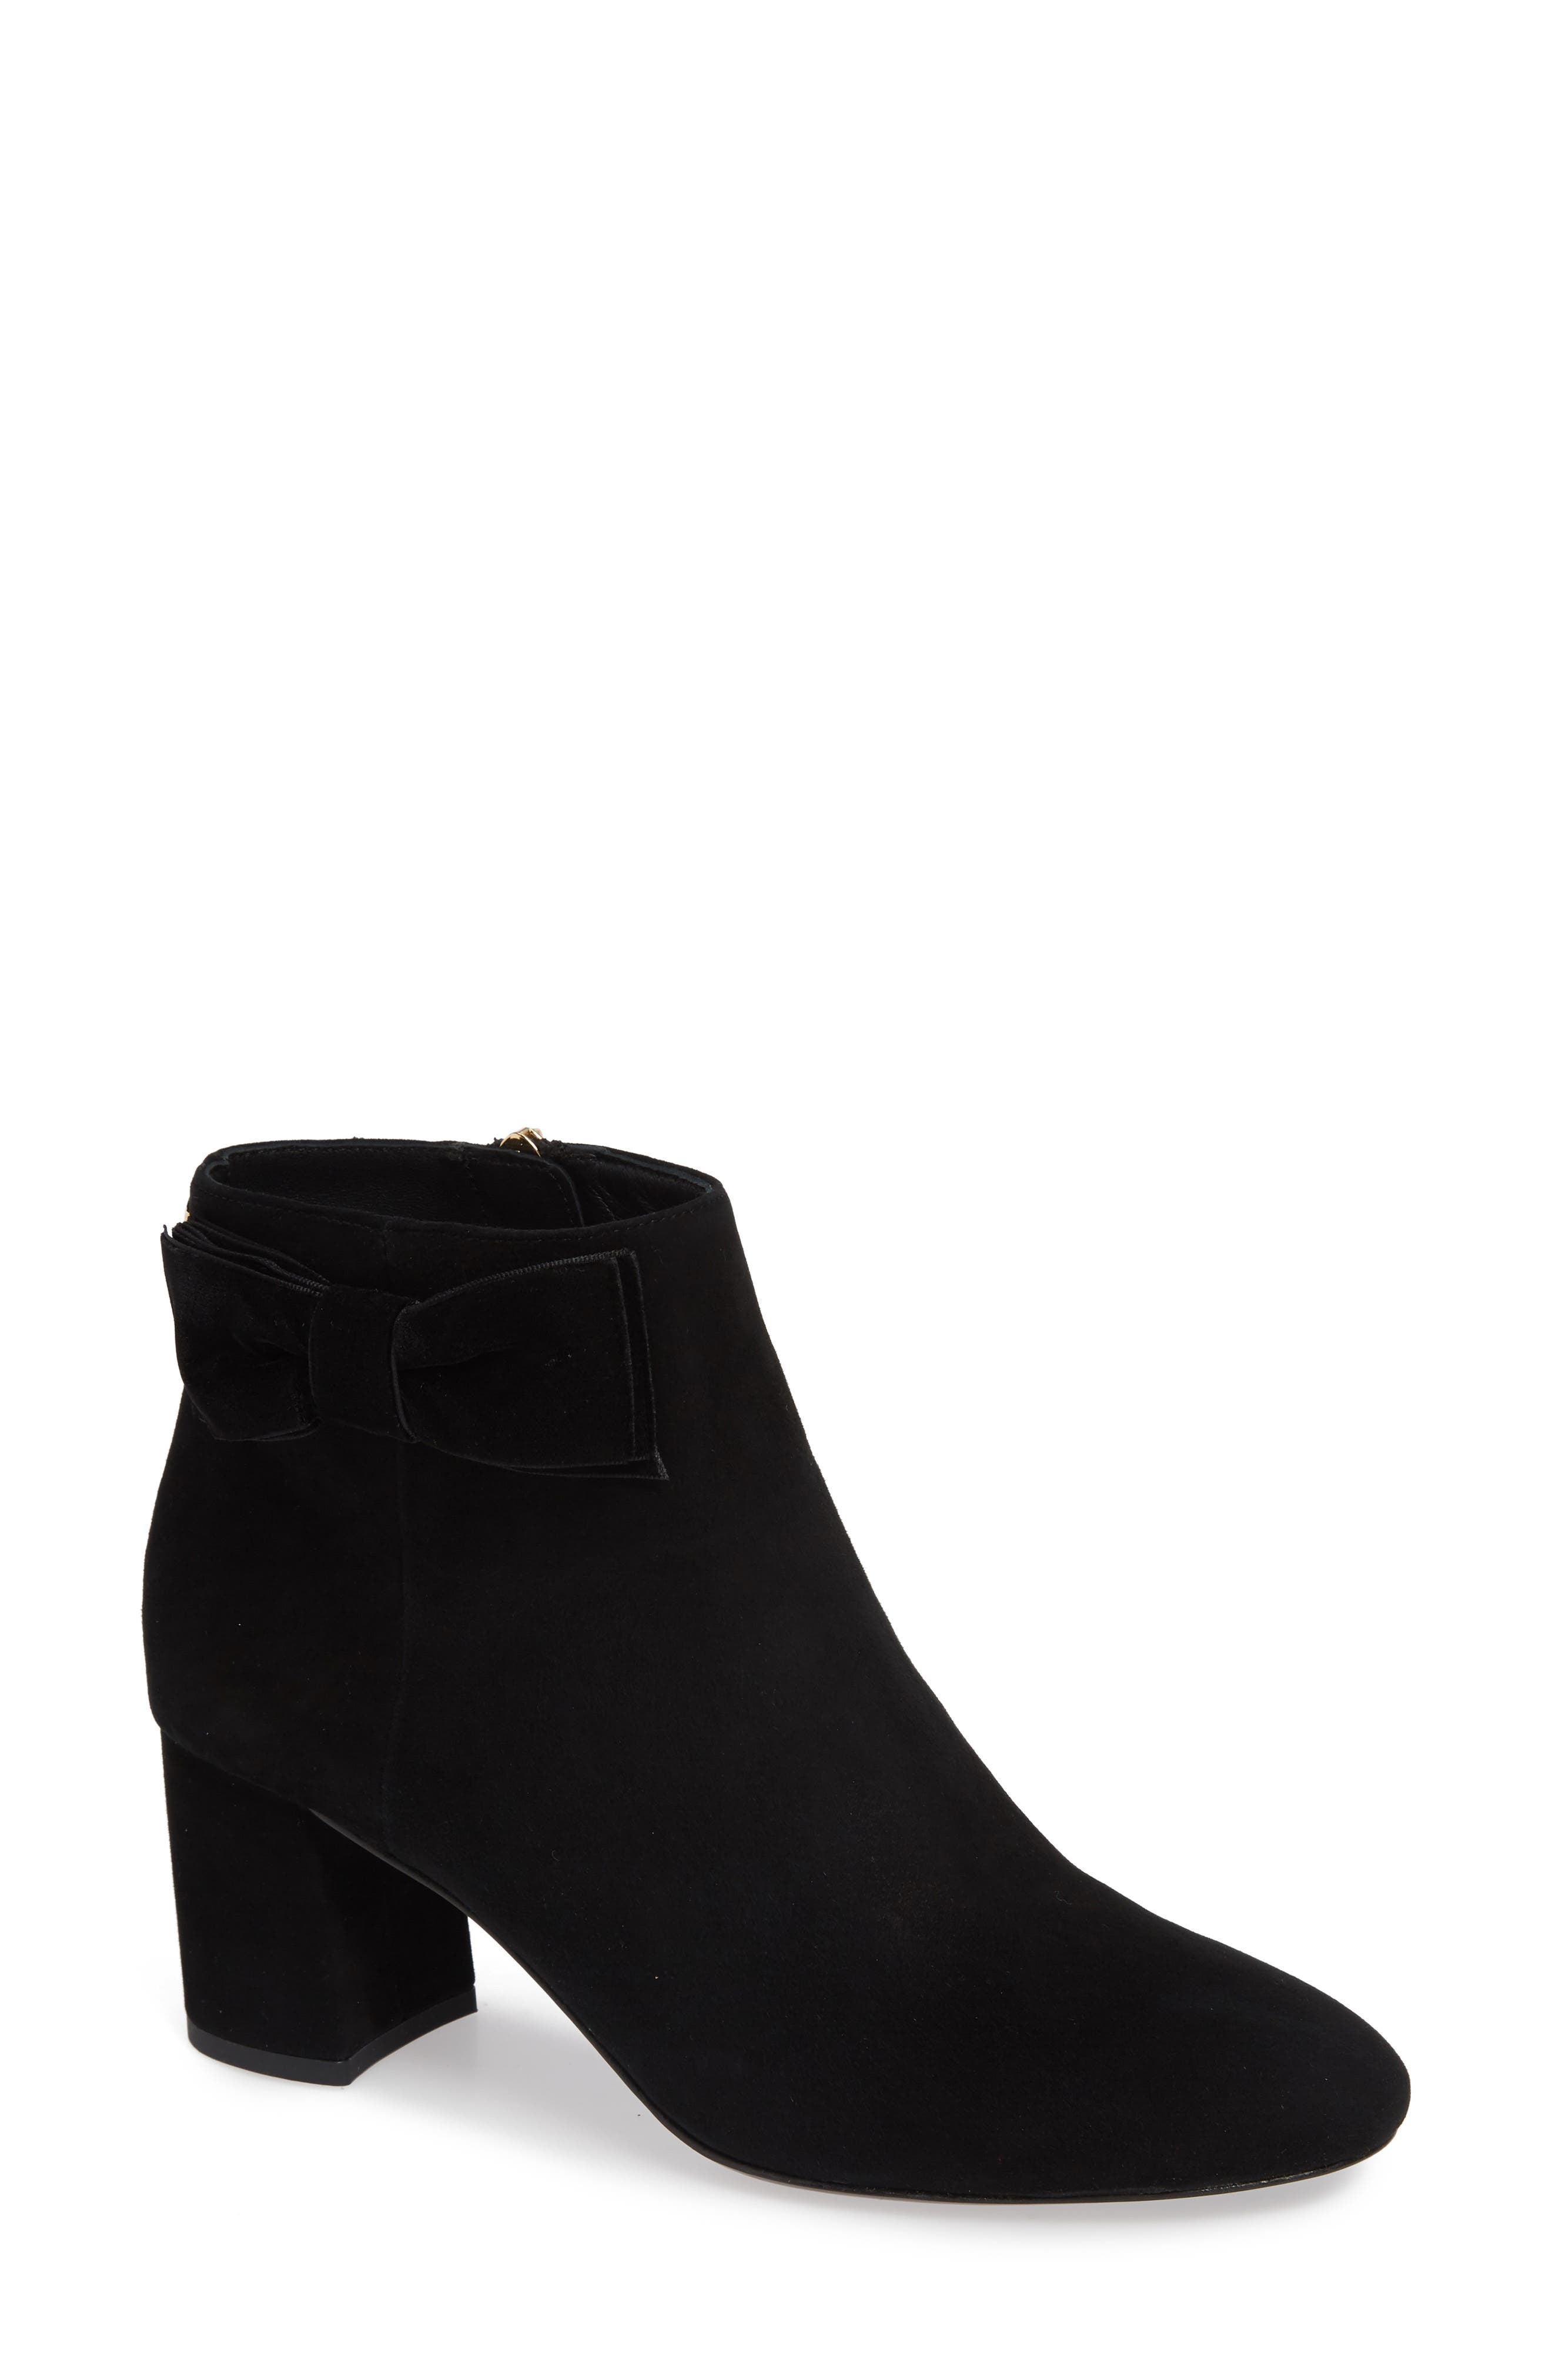 holly boots kate spade